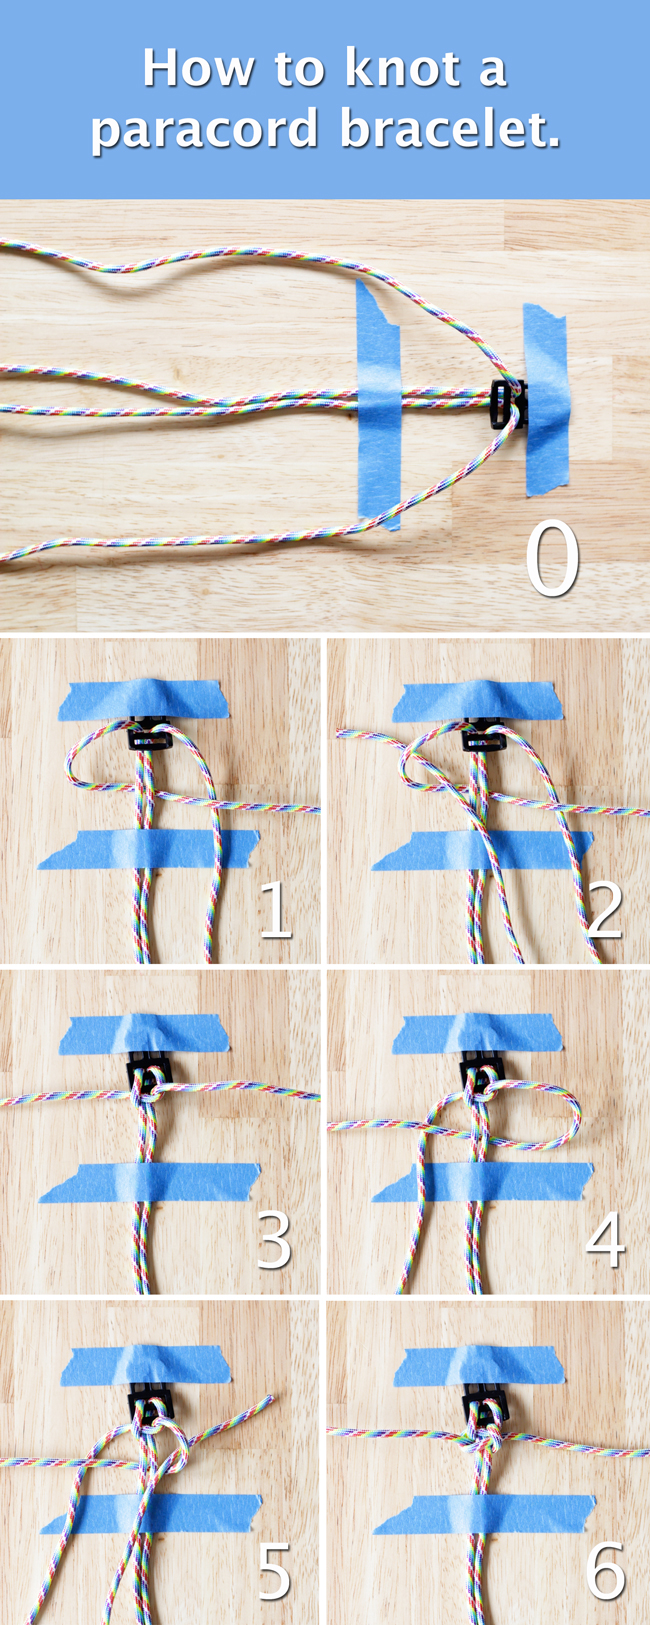 How to Knot a Paracord Bracelet or Collar - Tutorial at HandsOccupied.com